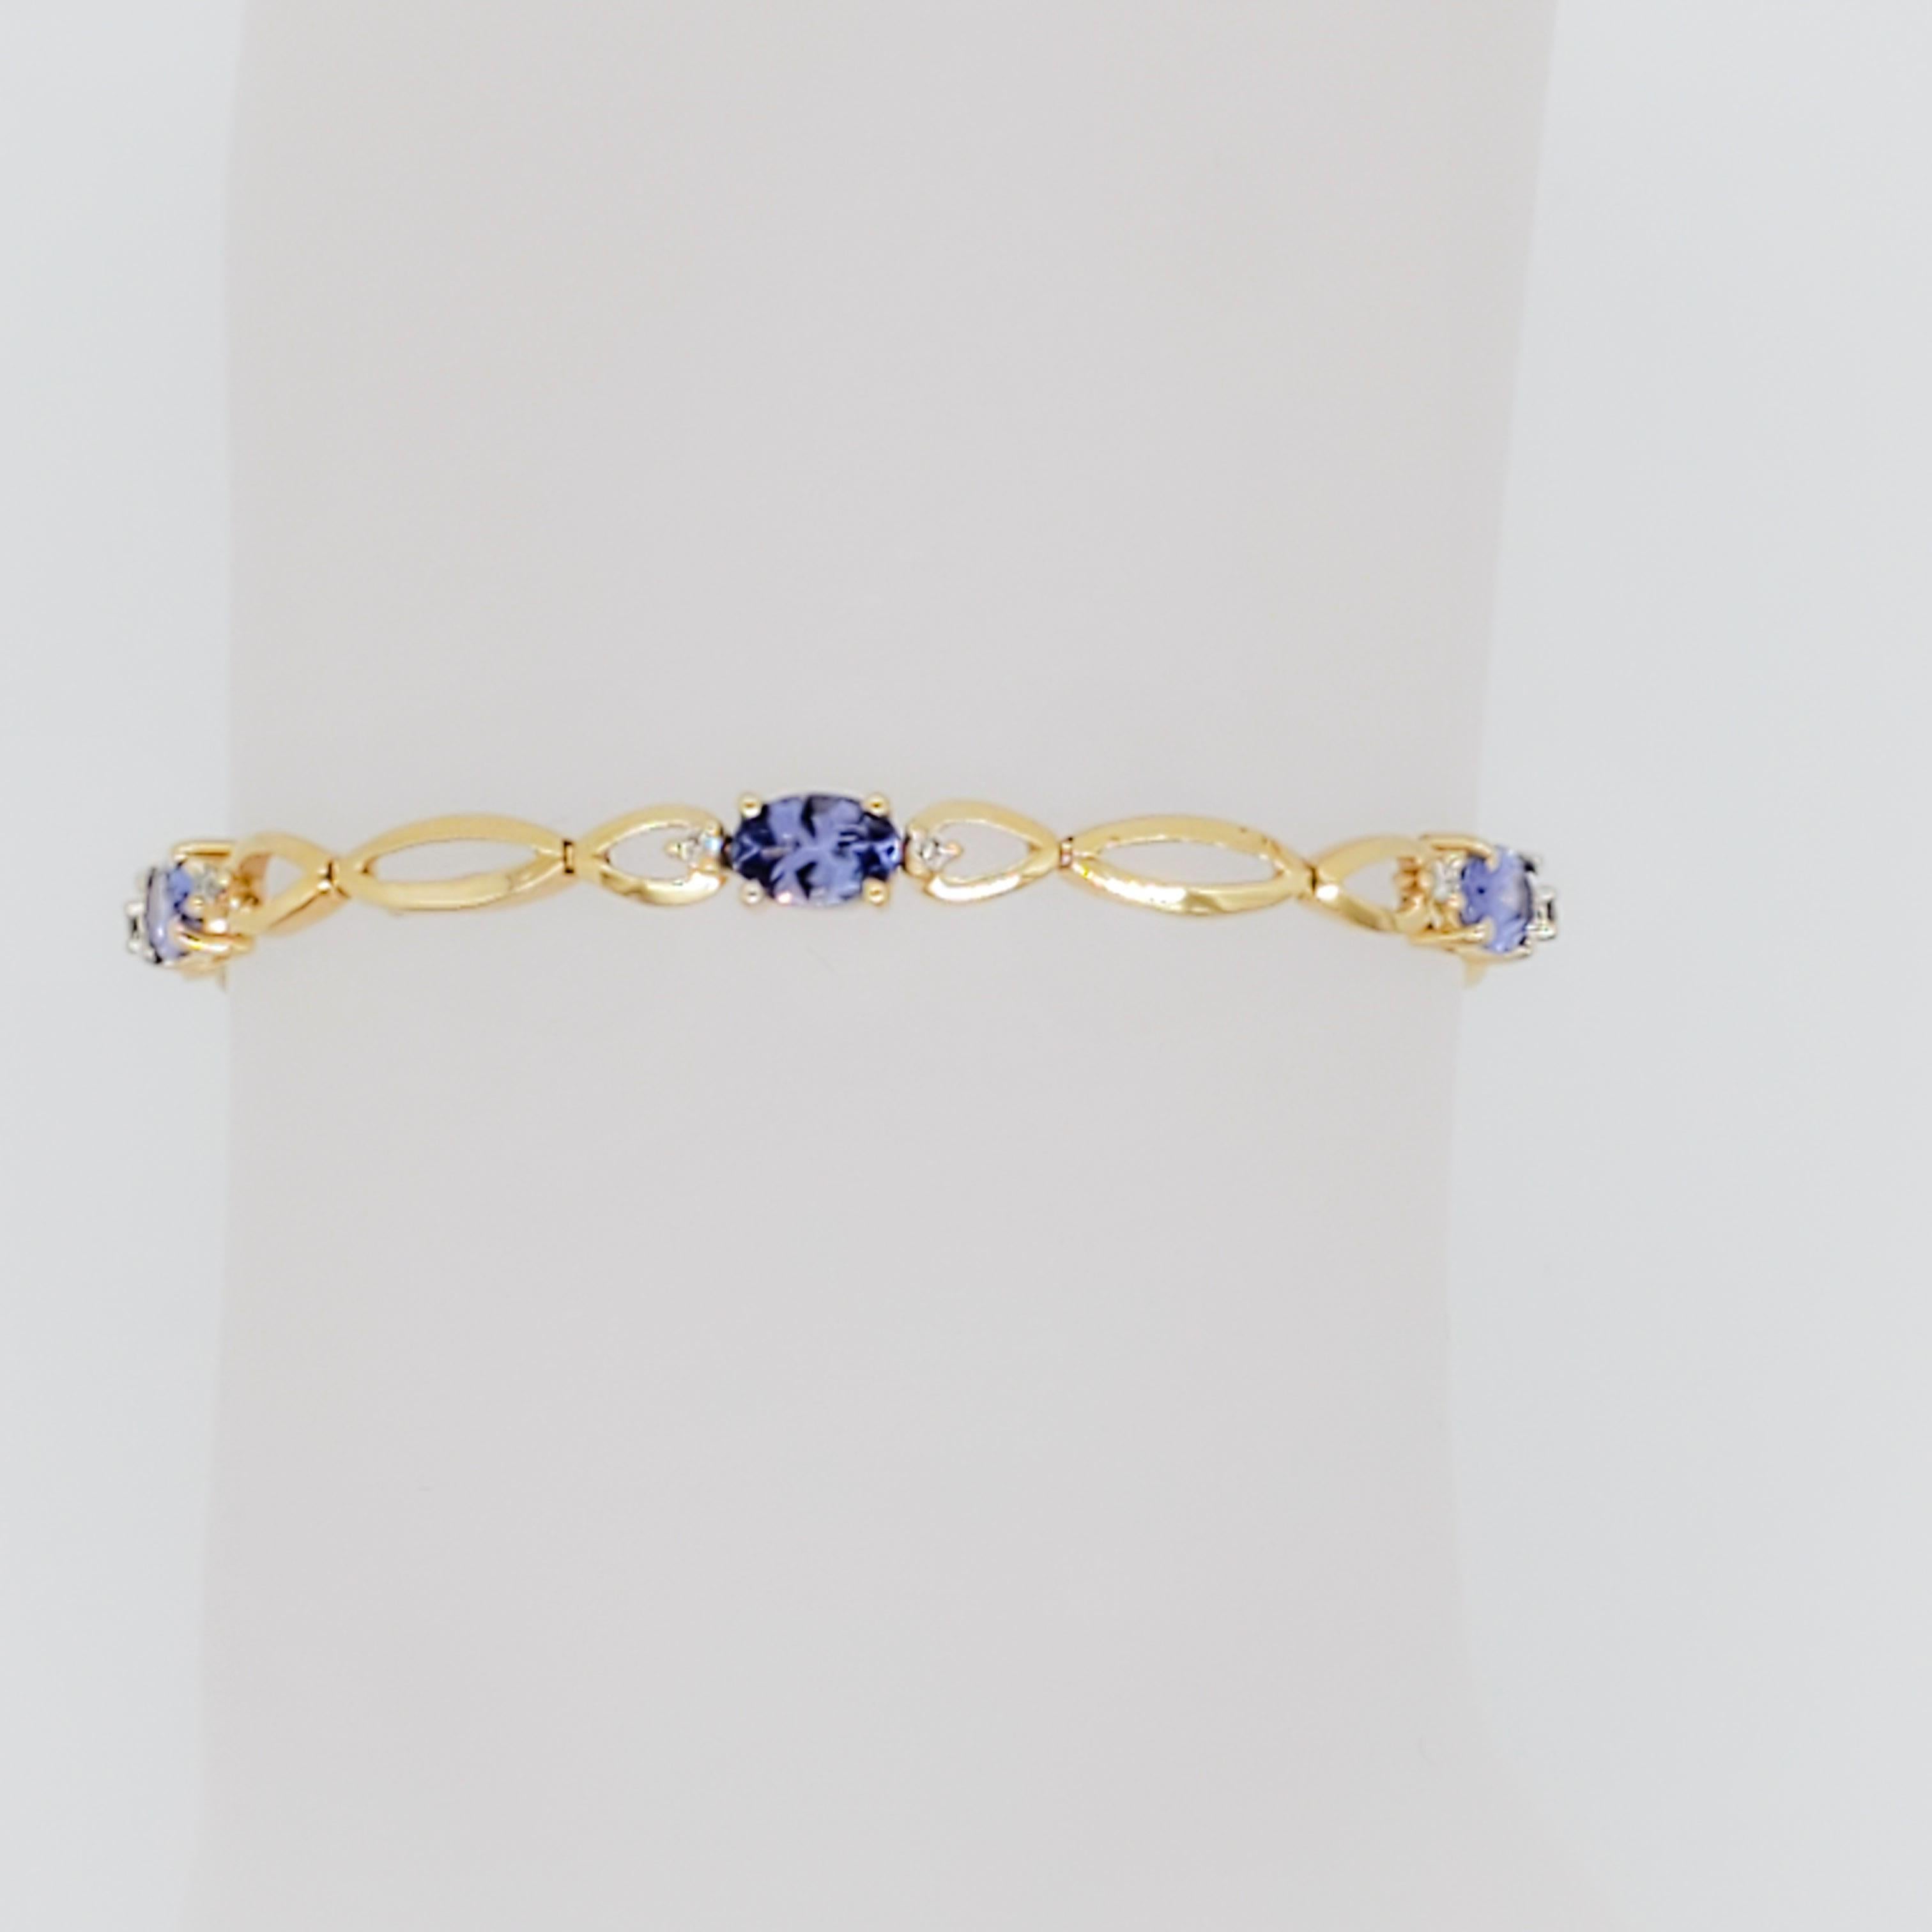 Gorgeous bracelet with 3.15 ct. tanzanite ovals and 0.17 ct. good quality white diamond rounds.  Handmade in 14k yellow gold.  Length of bracelet is 7.5